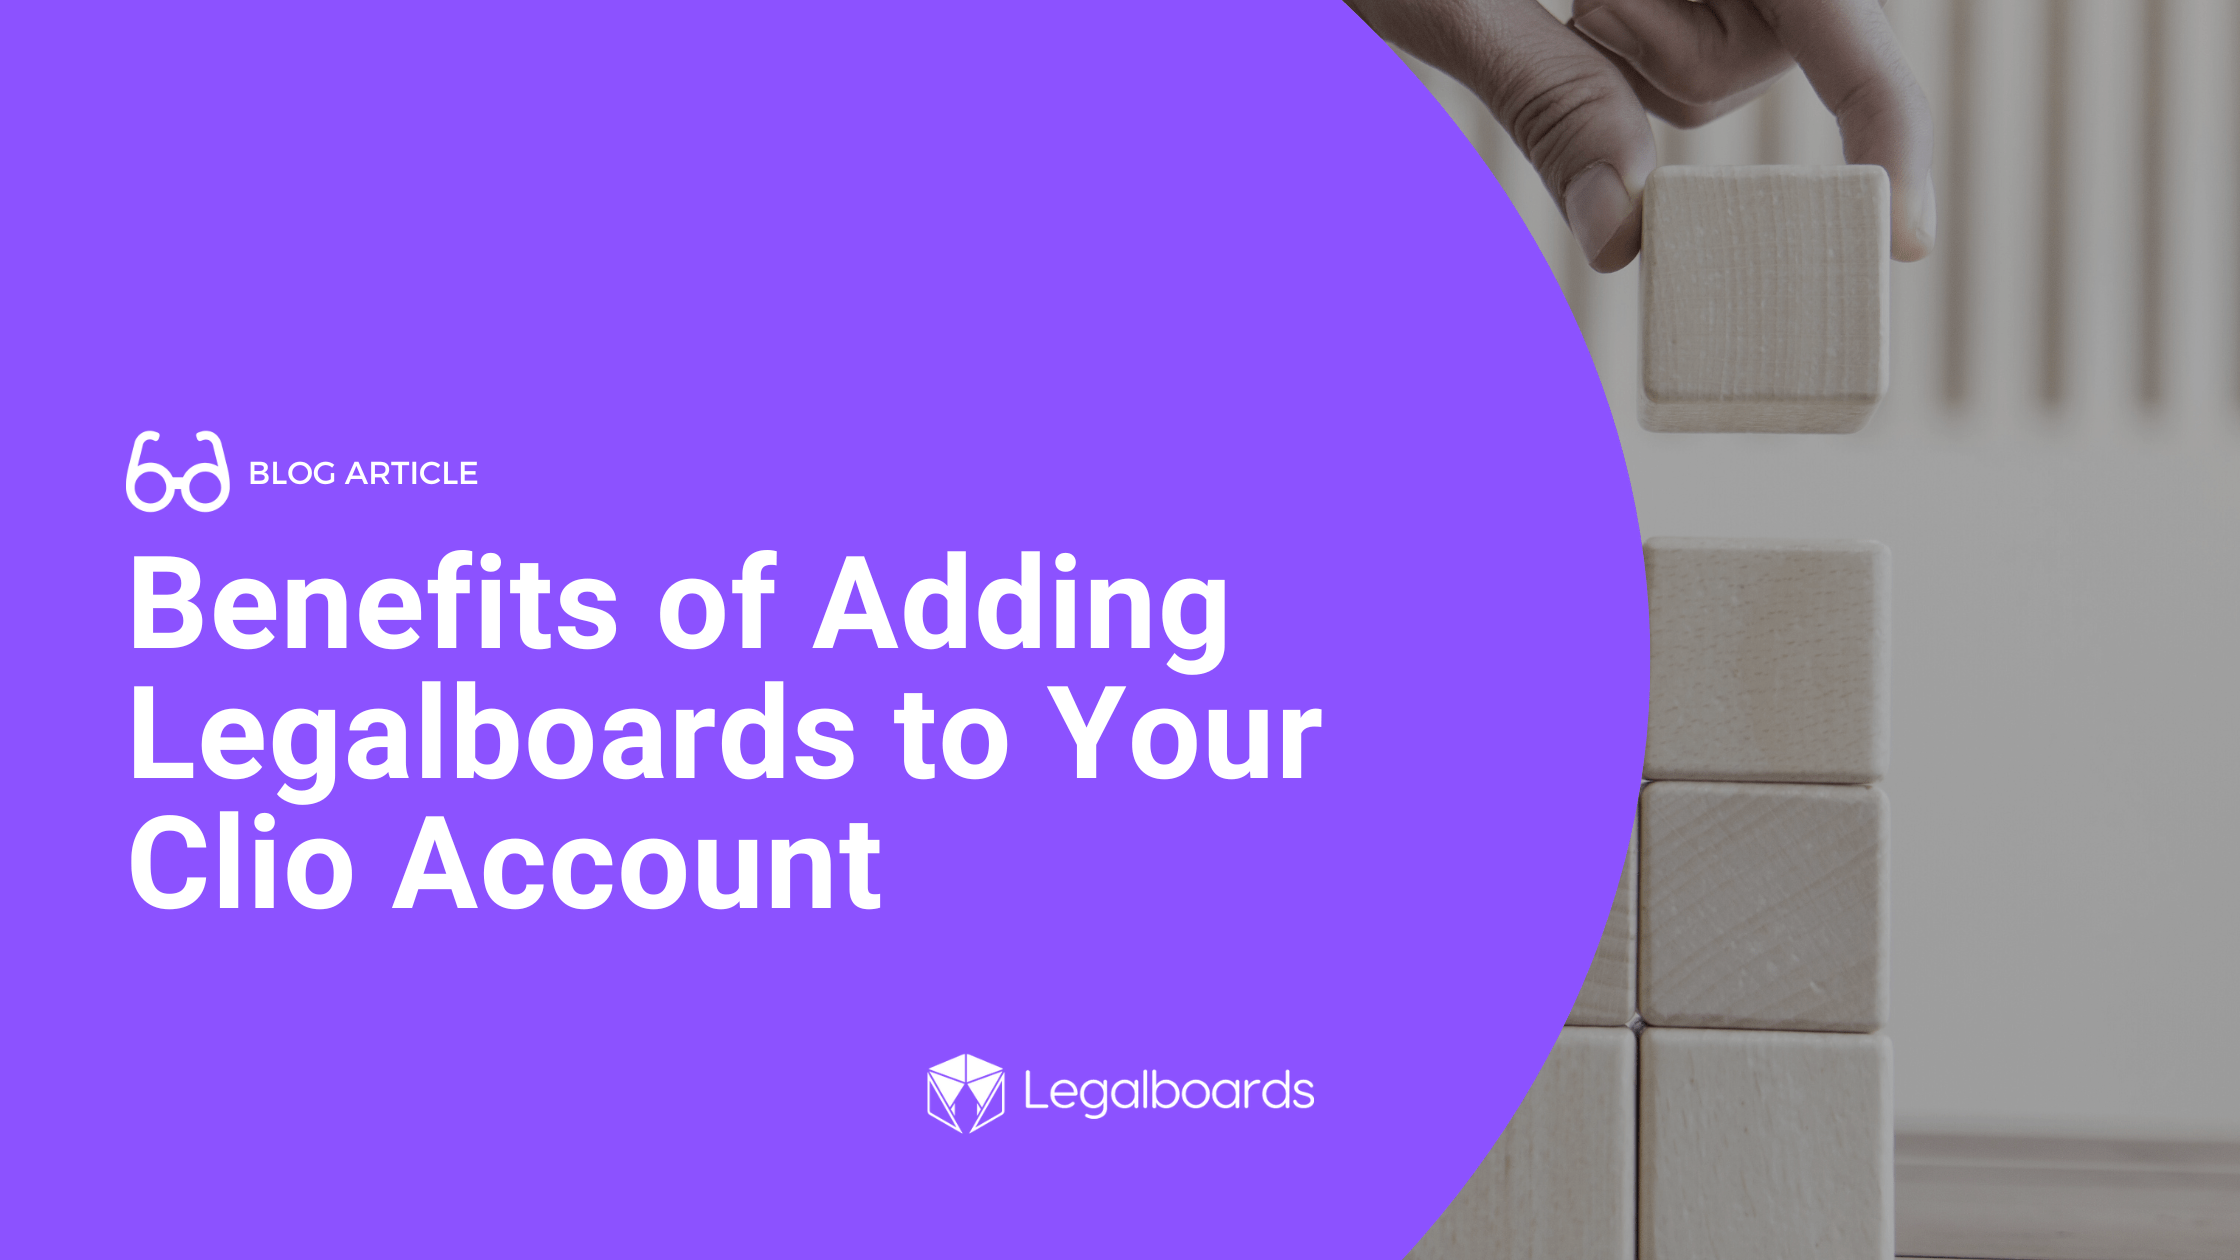 Benefits of adding Legalboards to your Clio account